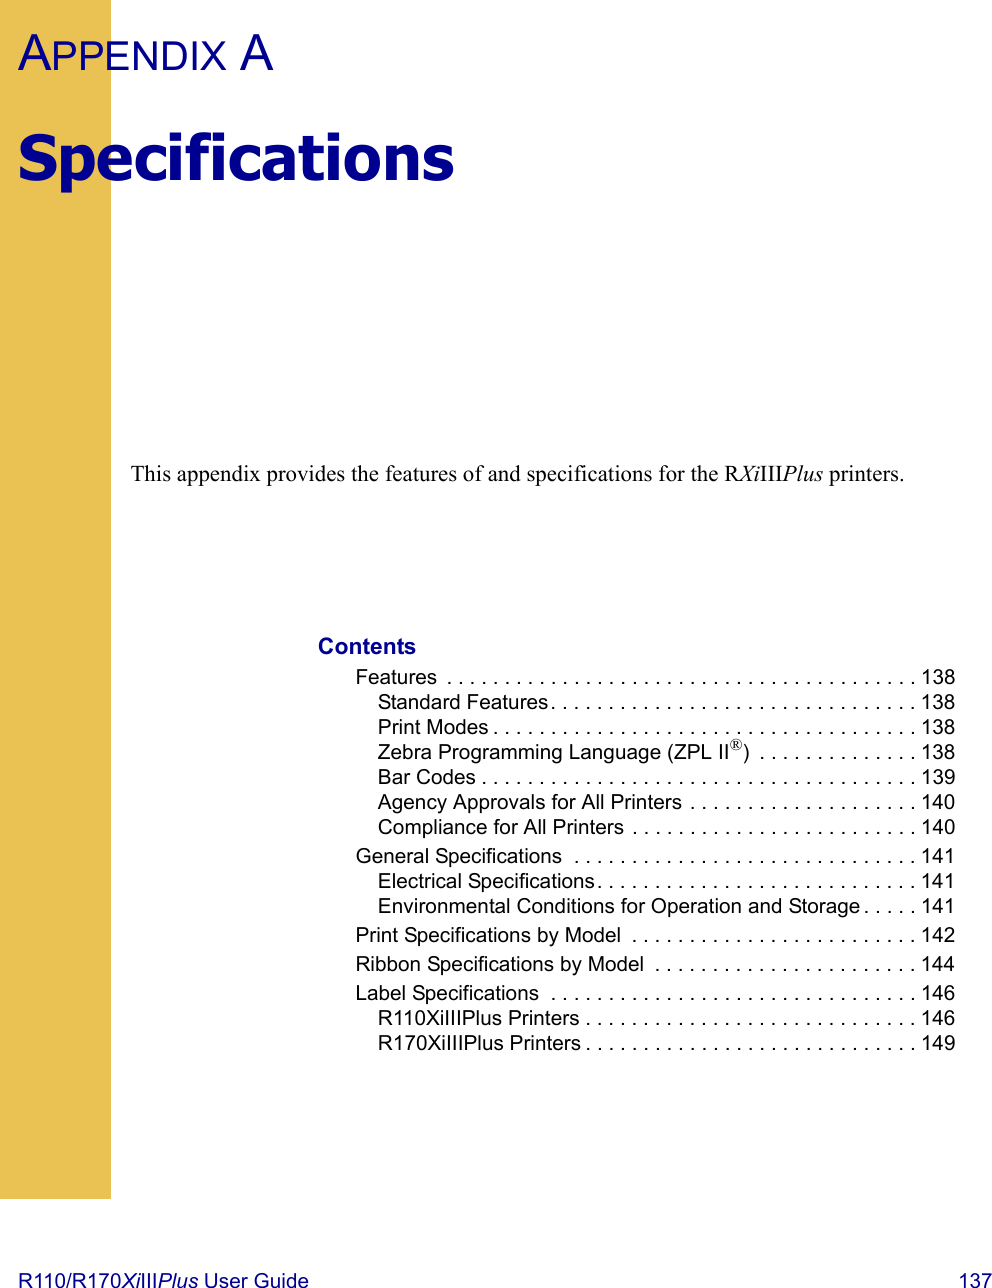 R110/R170XiIIIPlus User Guide  137APPENDIX ASpecificationsThis appendix provides the features of and specifications for the RXiIIIPlus printers.ContentsFeatures  . . . . . . . . . . . . . . . . . . . . . . . . . . . . . . . . . . . . . . . . . 138Standard Features. . . . . . . . . . . . . . . . . . . . . . . . . . . . . . . . 138Print Modes . . . . . . . . . . . . . . . . . . . . . . . . . . . . . . . . . . . . . 138Zebra Programming Language (ZPL II®)  . . . . . . . . . . . . . . 138Bar Codes . . . . . . . . . . . . . . . . . . . . . . . . . . . . . . . . . . . . . . 139Agency Approvals for All Printers . . . . . . . . . . . . . . . . . . . . 140Compliance for All Printers . . . . . . . . . . . . . . . . . . . . . . . . . 140General Specifications  . . . . . . . . . . . . . . . . . . . . . . . . . . . . . . 141Electrical Specifications. . . . . . . . . . . . . . . . . . . . . . . . . . . . 141Environmental Conditions for Operation and Storage . . . . . 141Print Specifications by Model  . . . . . . . . . . . . . . . . . . . . . . . . . 142Ribbon Specifications by Model  . . . . . . . . . . . . . . . . . . . . . . . 144Label Specifications  . . . . . . . . . . . . . . . . . . . . . . . . . . . . . . . . 146R110XiIIIPlus Printers . . . . . . . . . . . . . . . . . . . . . . . . . . . . . 146R170XiIIIPlus Printers . . . . . . . . . . . . . . . . . . . . . . . . . . . . . 149